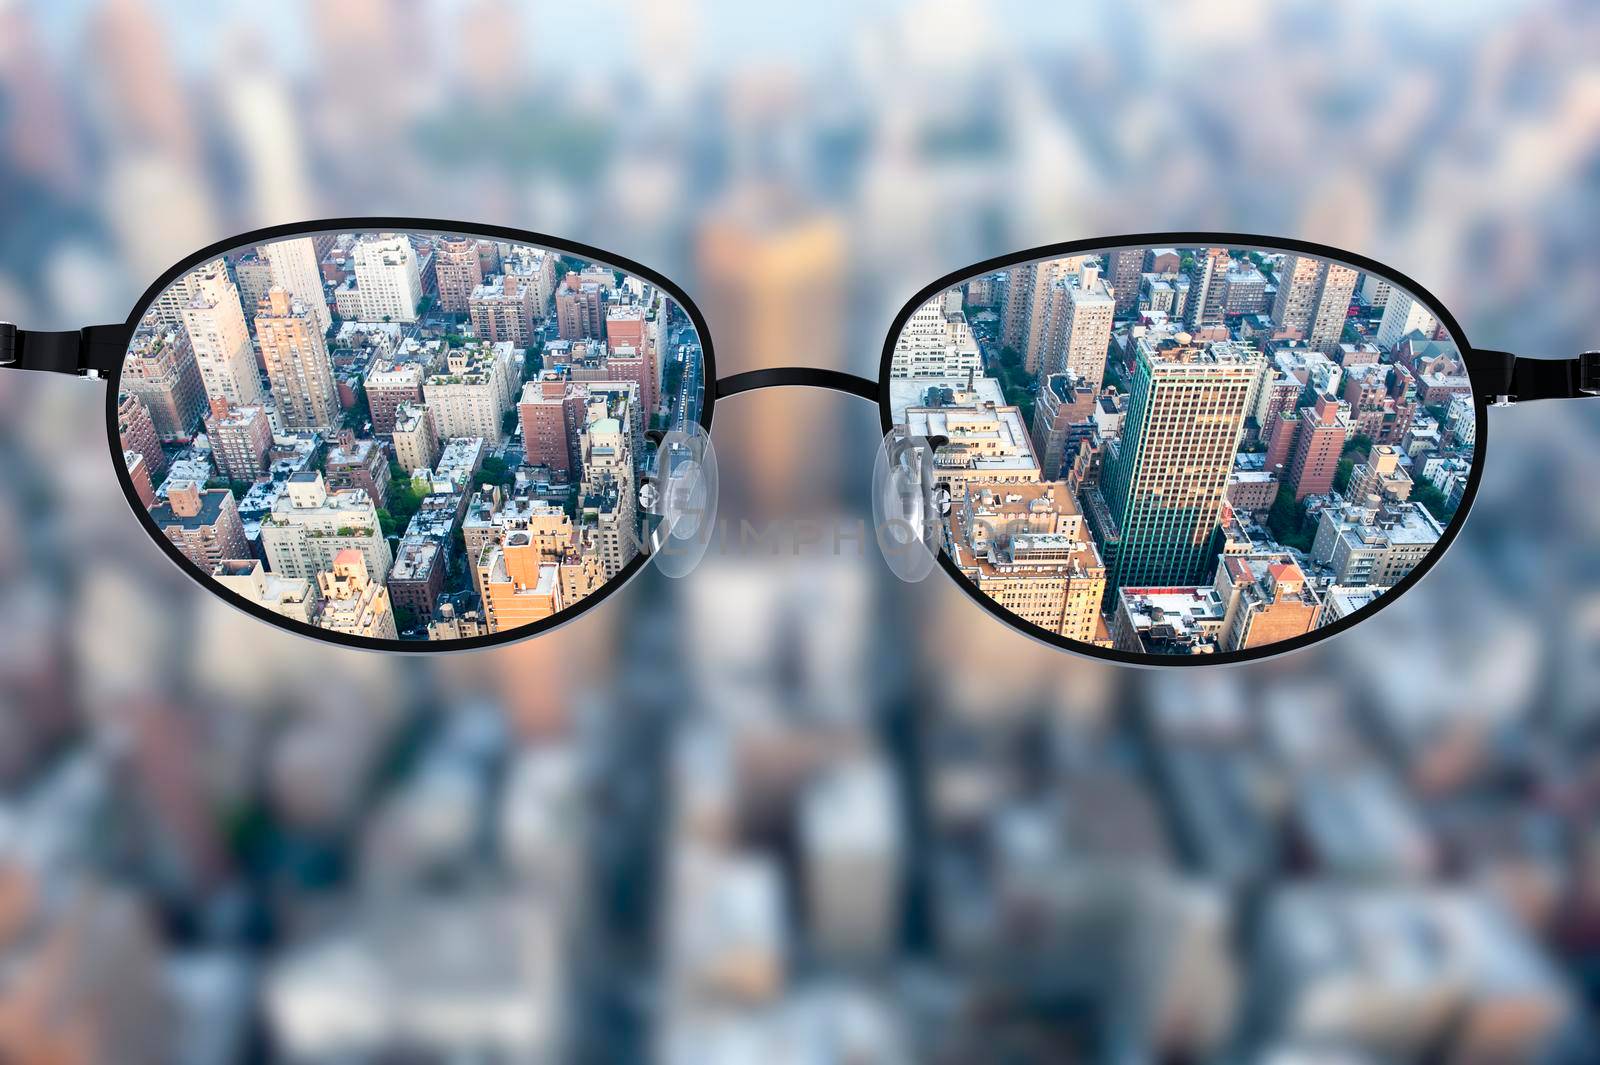 Clear cityscape focused in glasses lenses by cla78